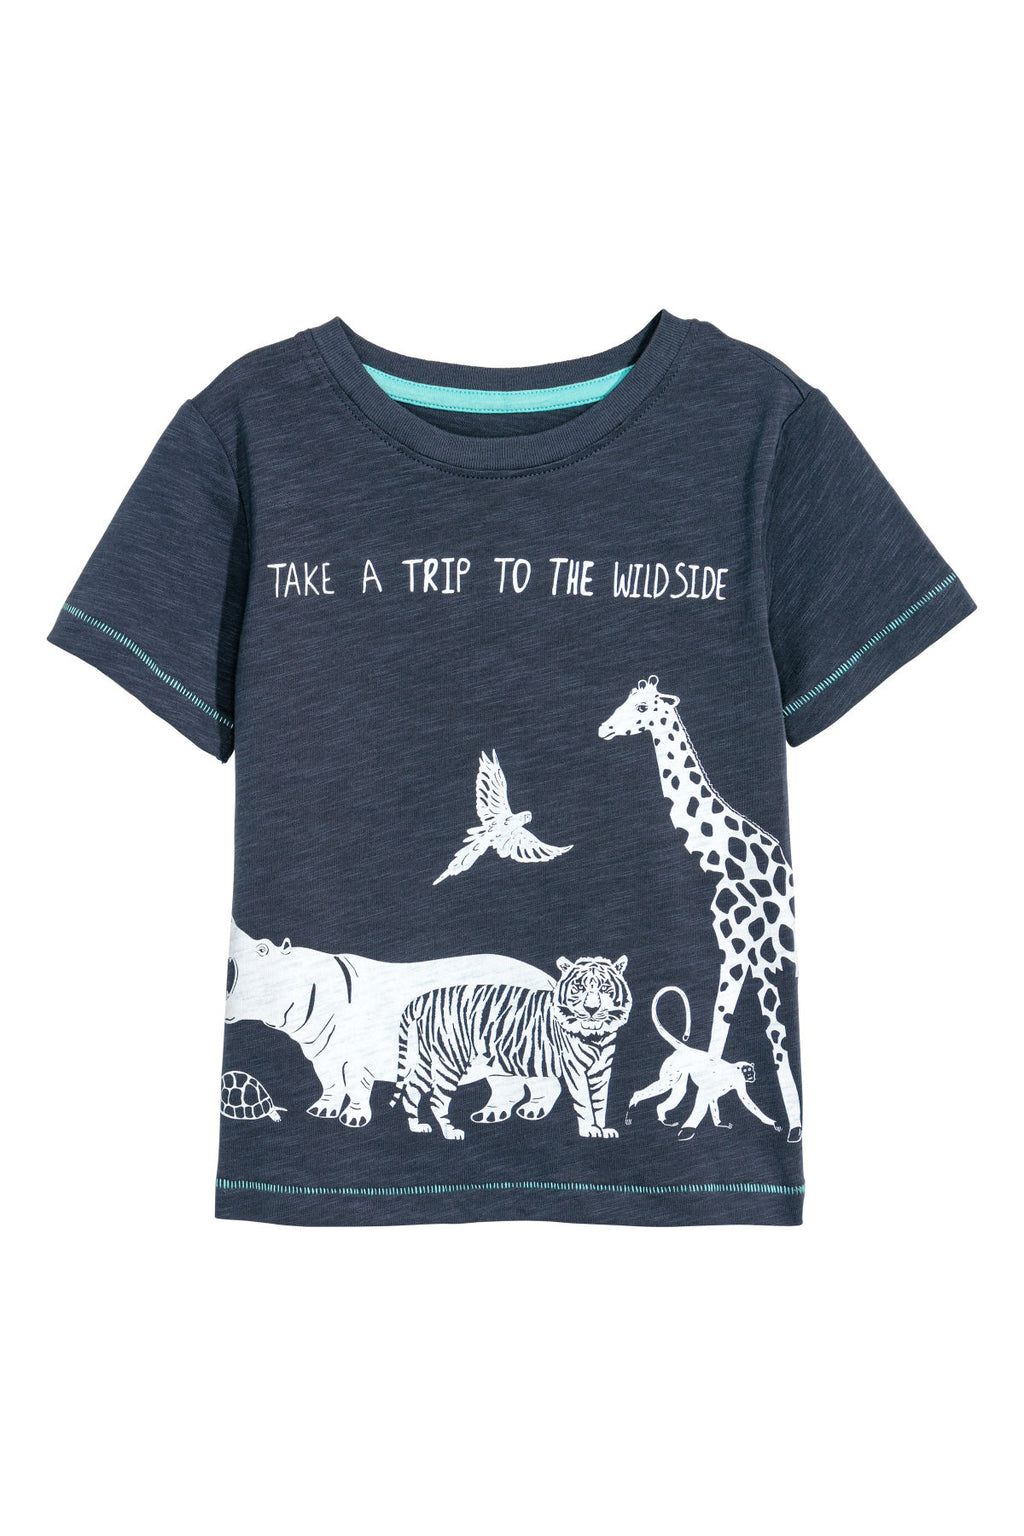 Remera H&M T-shirt with Printed Design